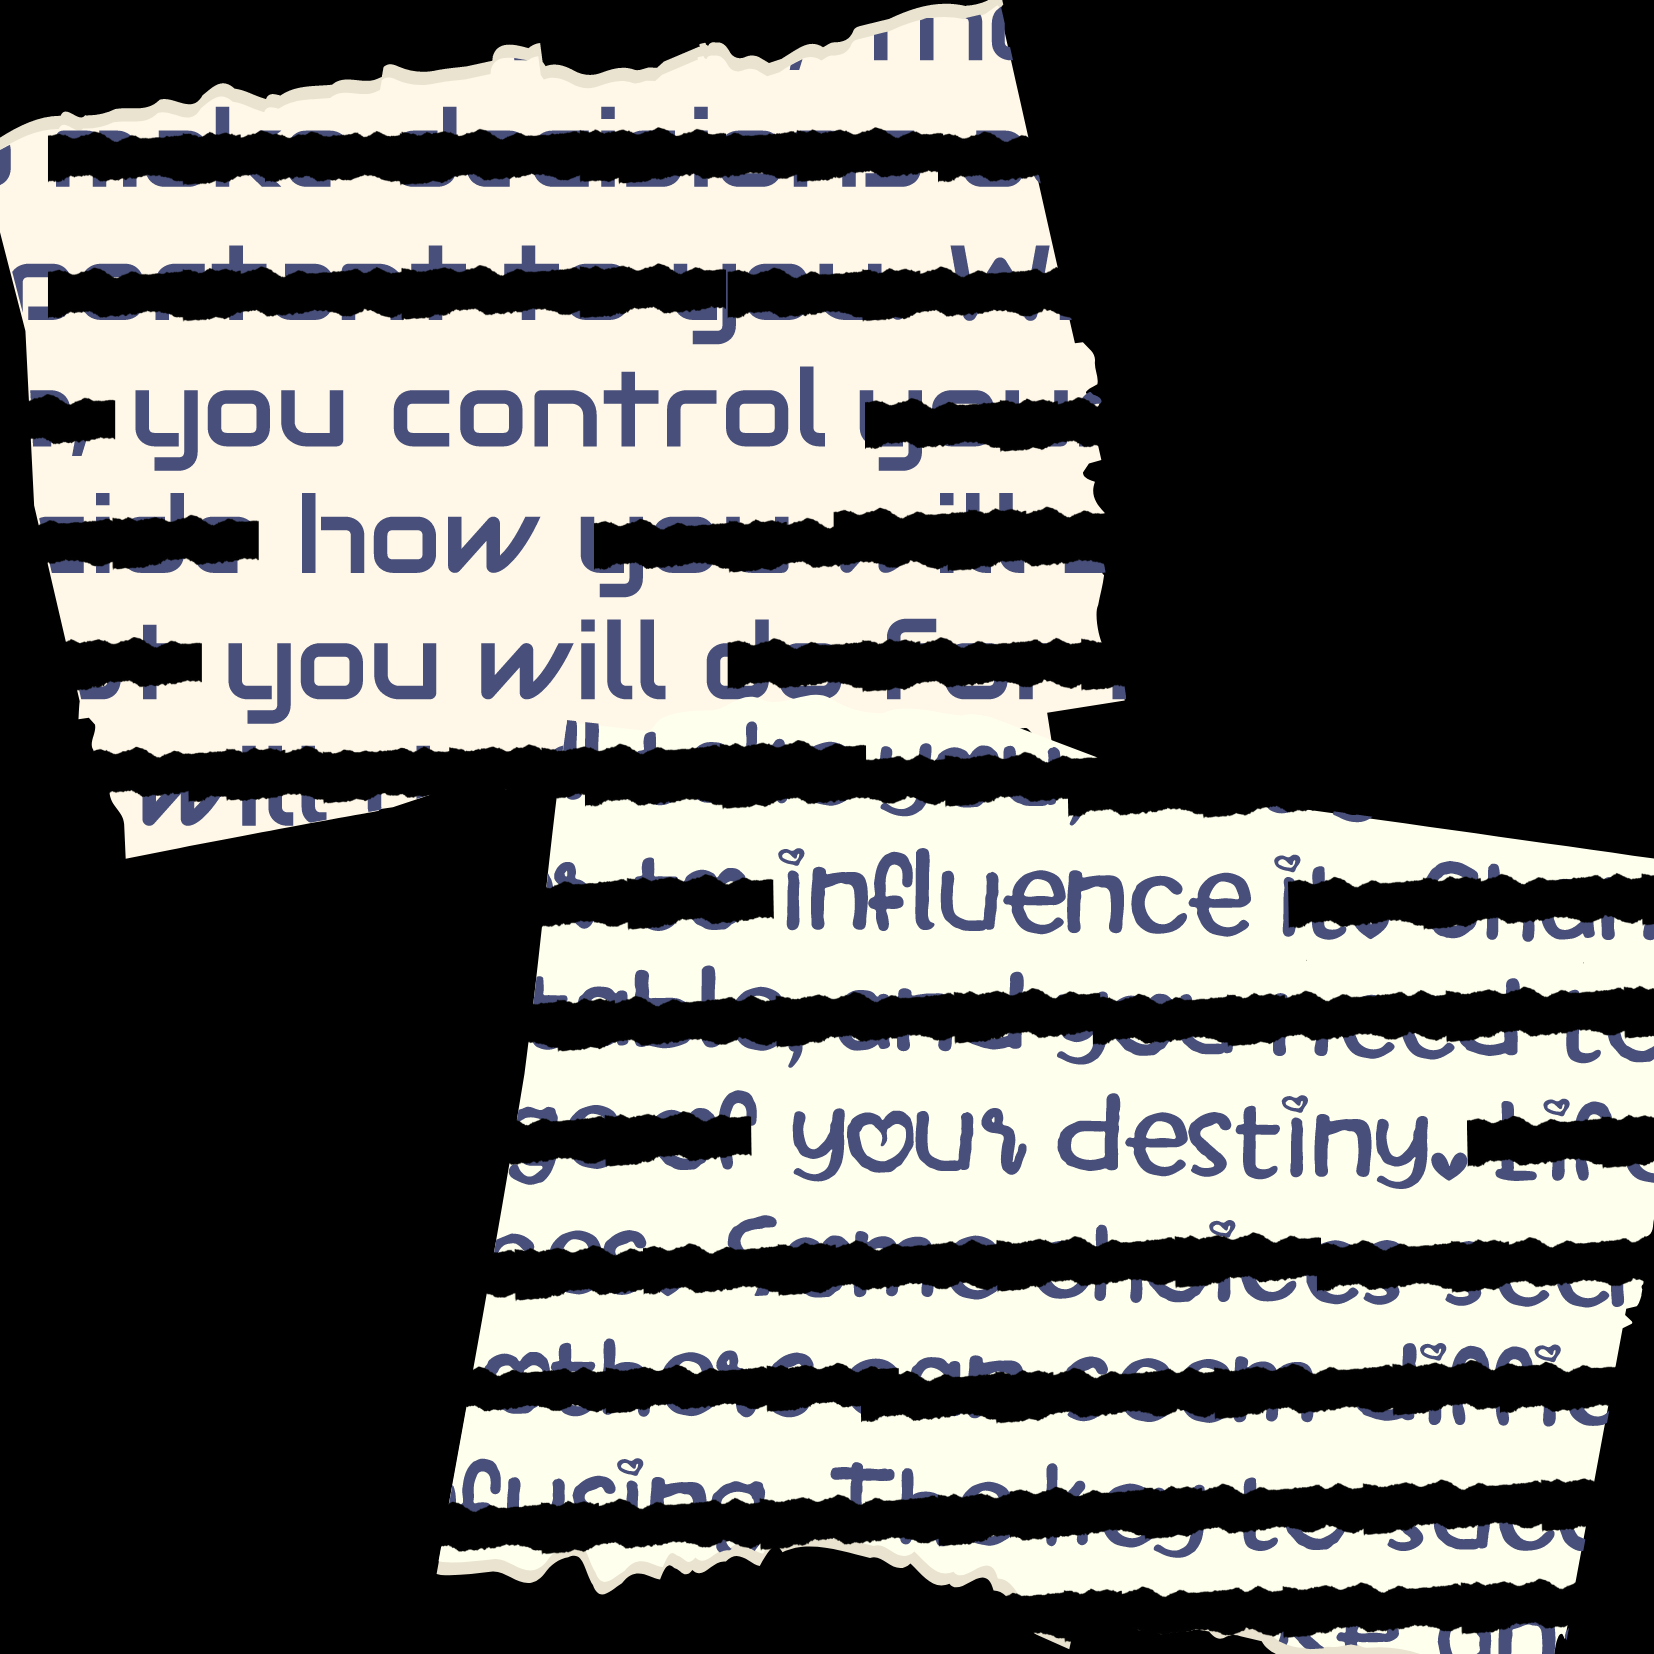 torn paper image with blackout lines to make the image read "you control how you will influence your destiny" on a black background